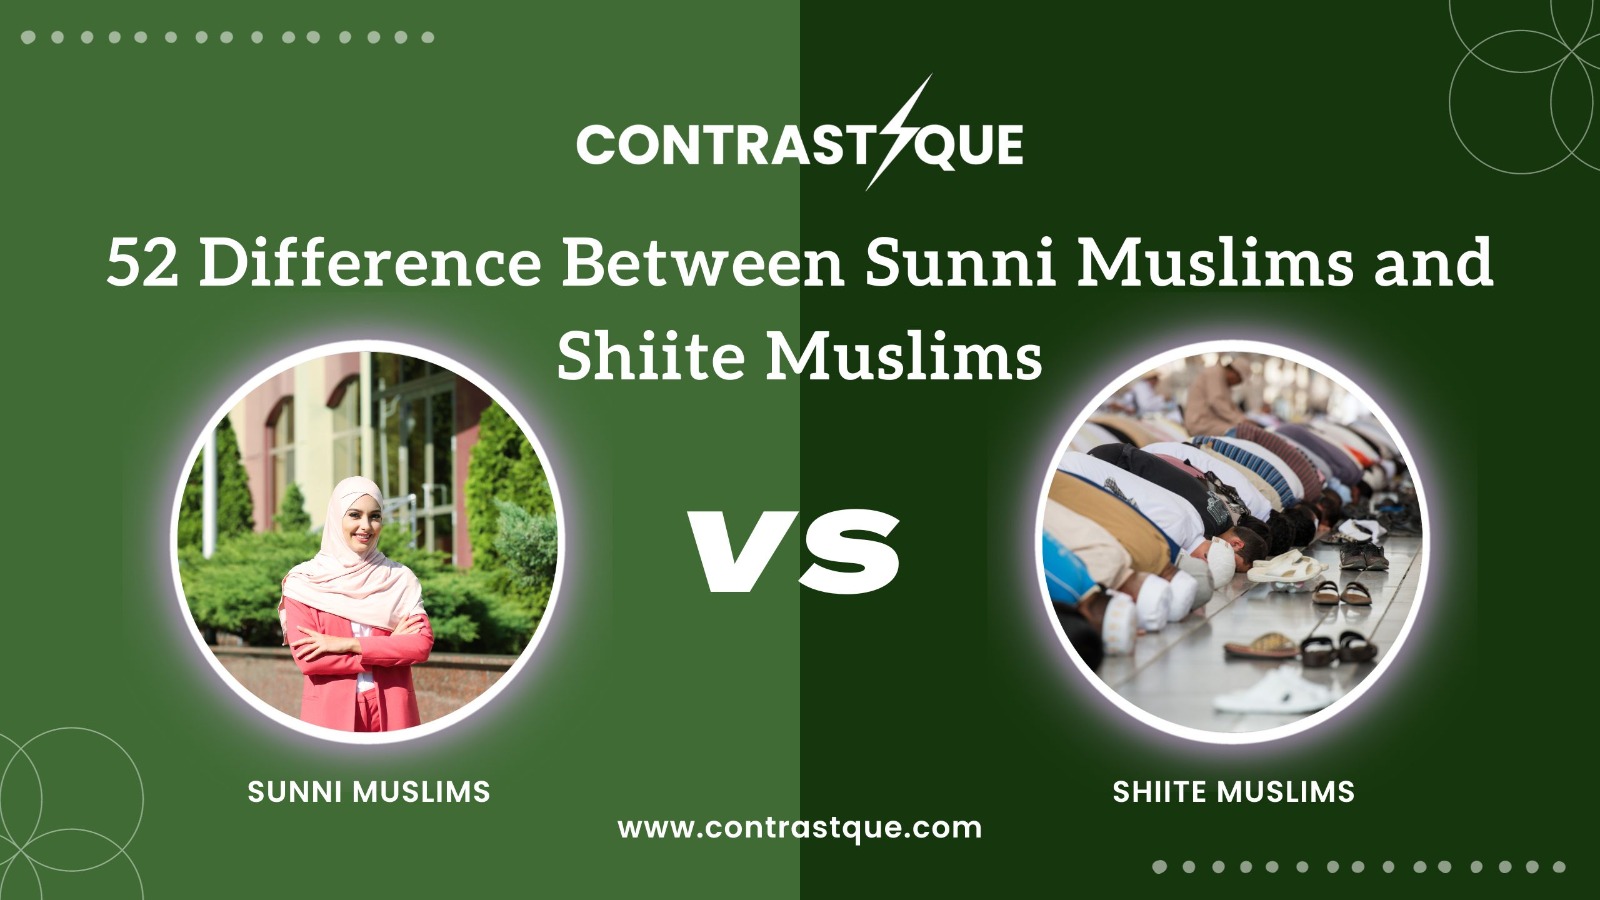 52 Difference Between Sunni Muslims and Shiite Muslims